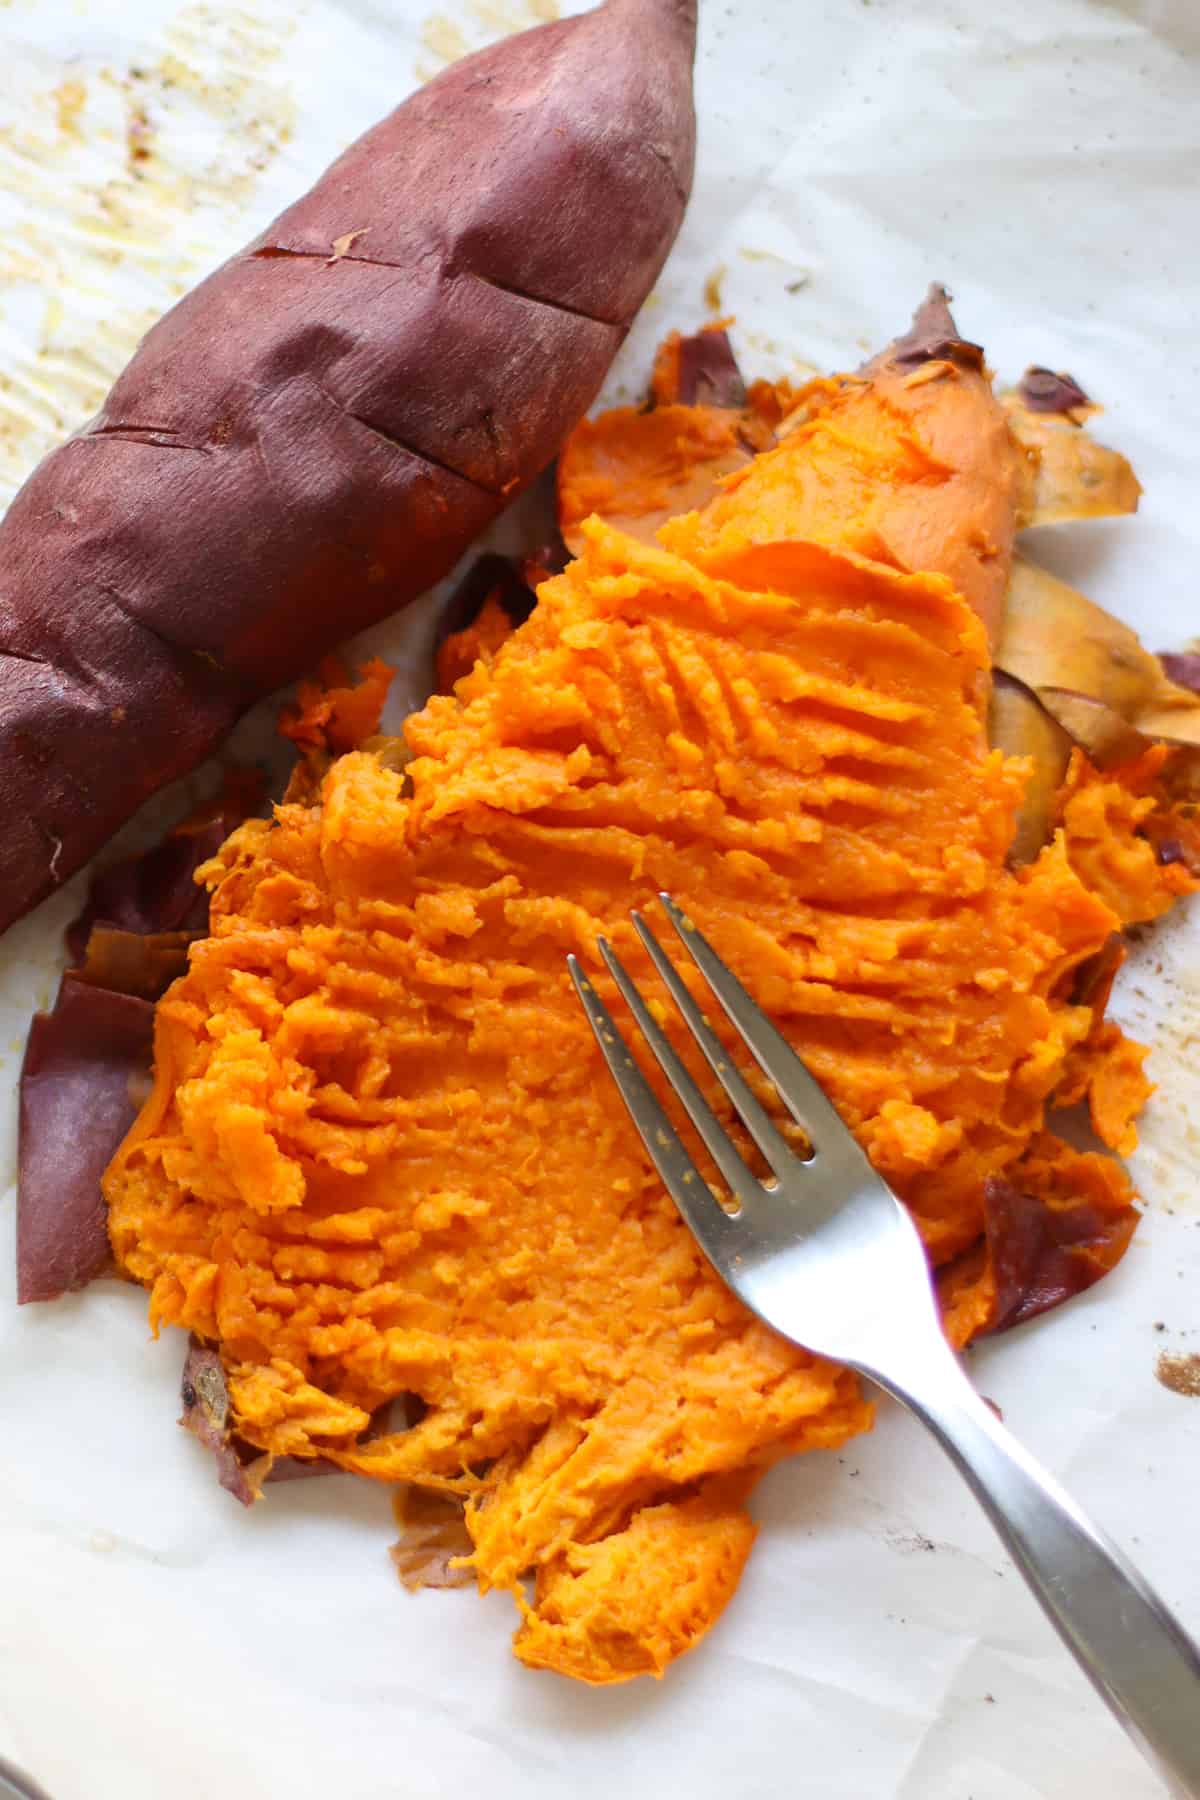 A sweet potato being mashed with a fork on parchment paper.